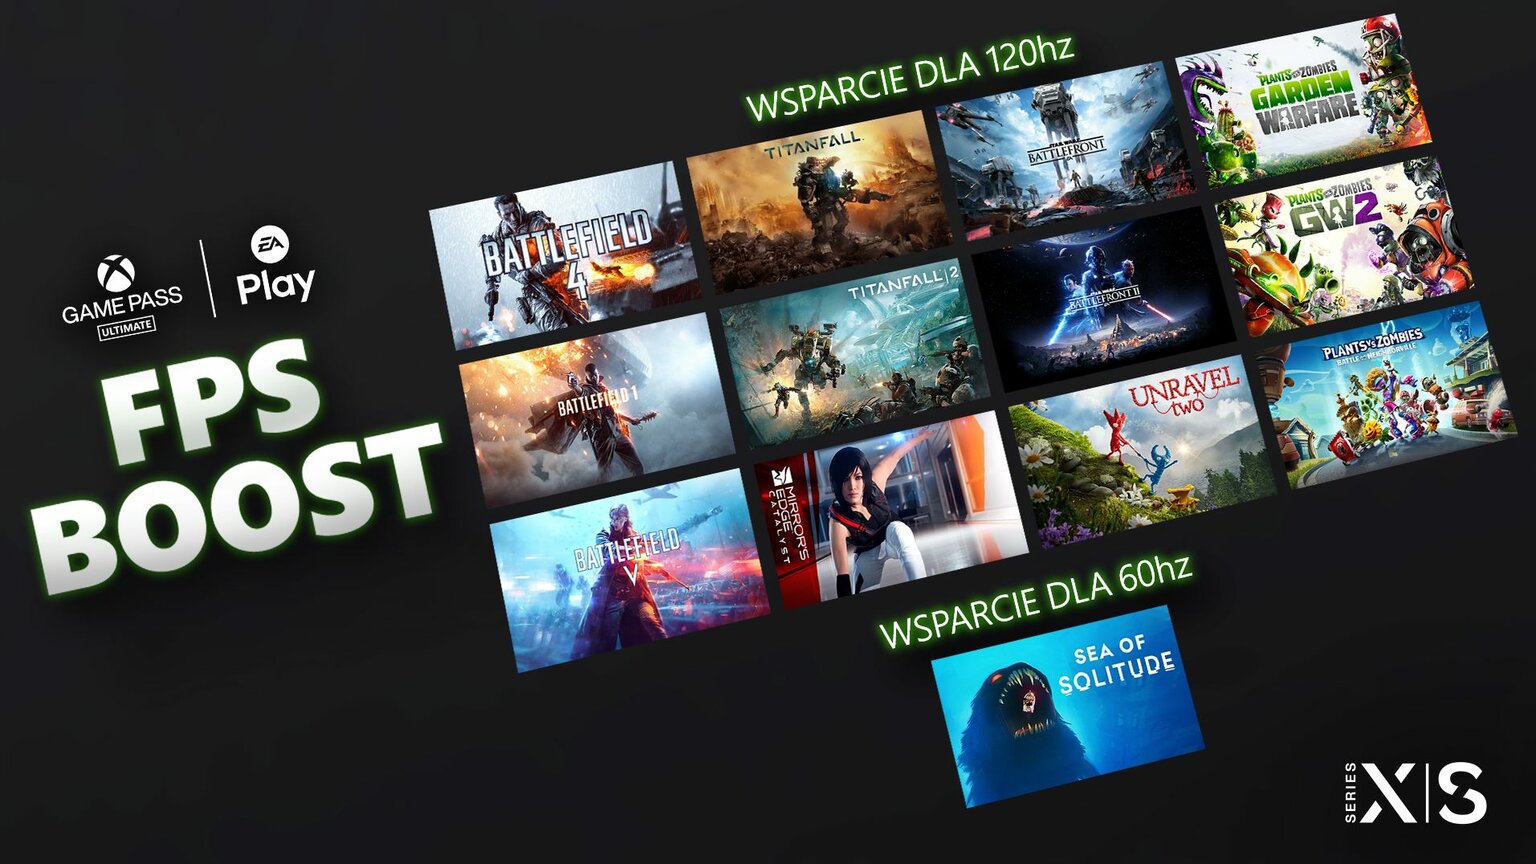 ea play xbox game pass link